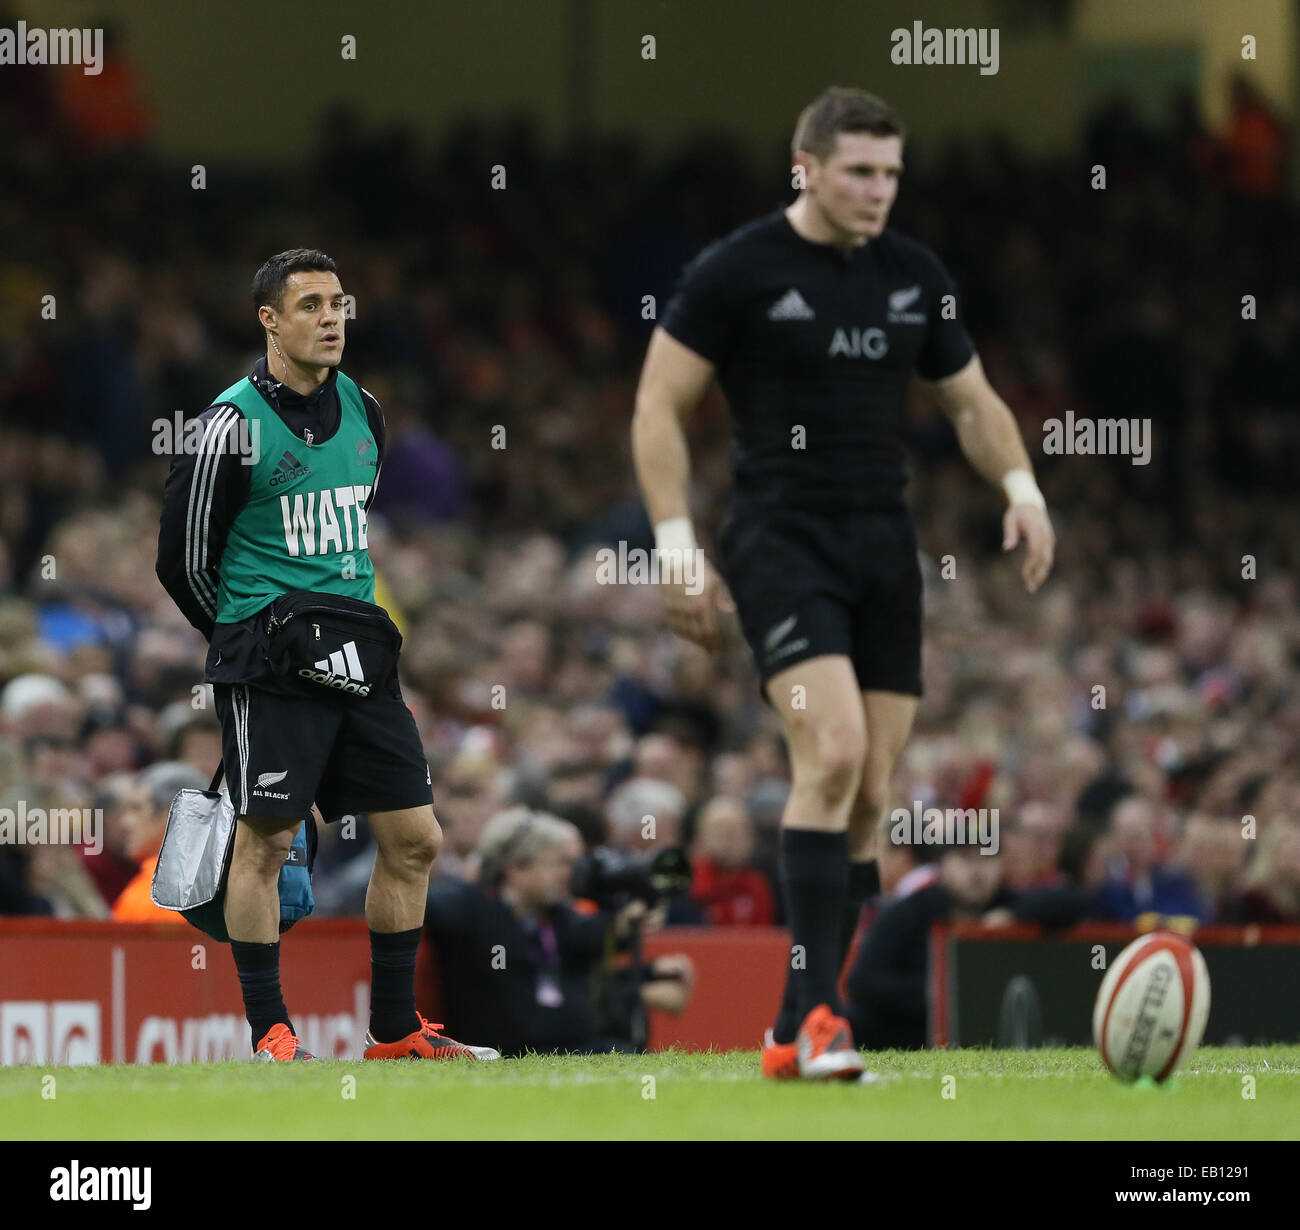 Cardiff, UK. 22nd Nov, 2014. Water boy for the day Dan Carter watches Colin Slade of New Zealand line up a conversion kick - Autumn Test Series - Wales vs New Zealand - Millennium Stadium - Cardiff - Wales - 22nd November 2014 - Picture Simon Bellis/Sportimage. © csm/Alamy Live News Stock Photo